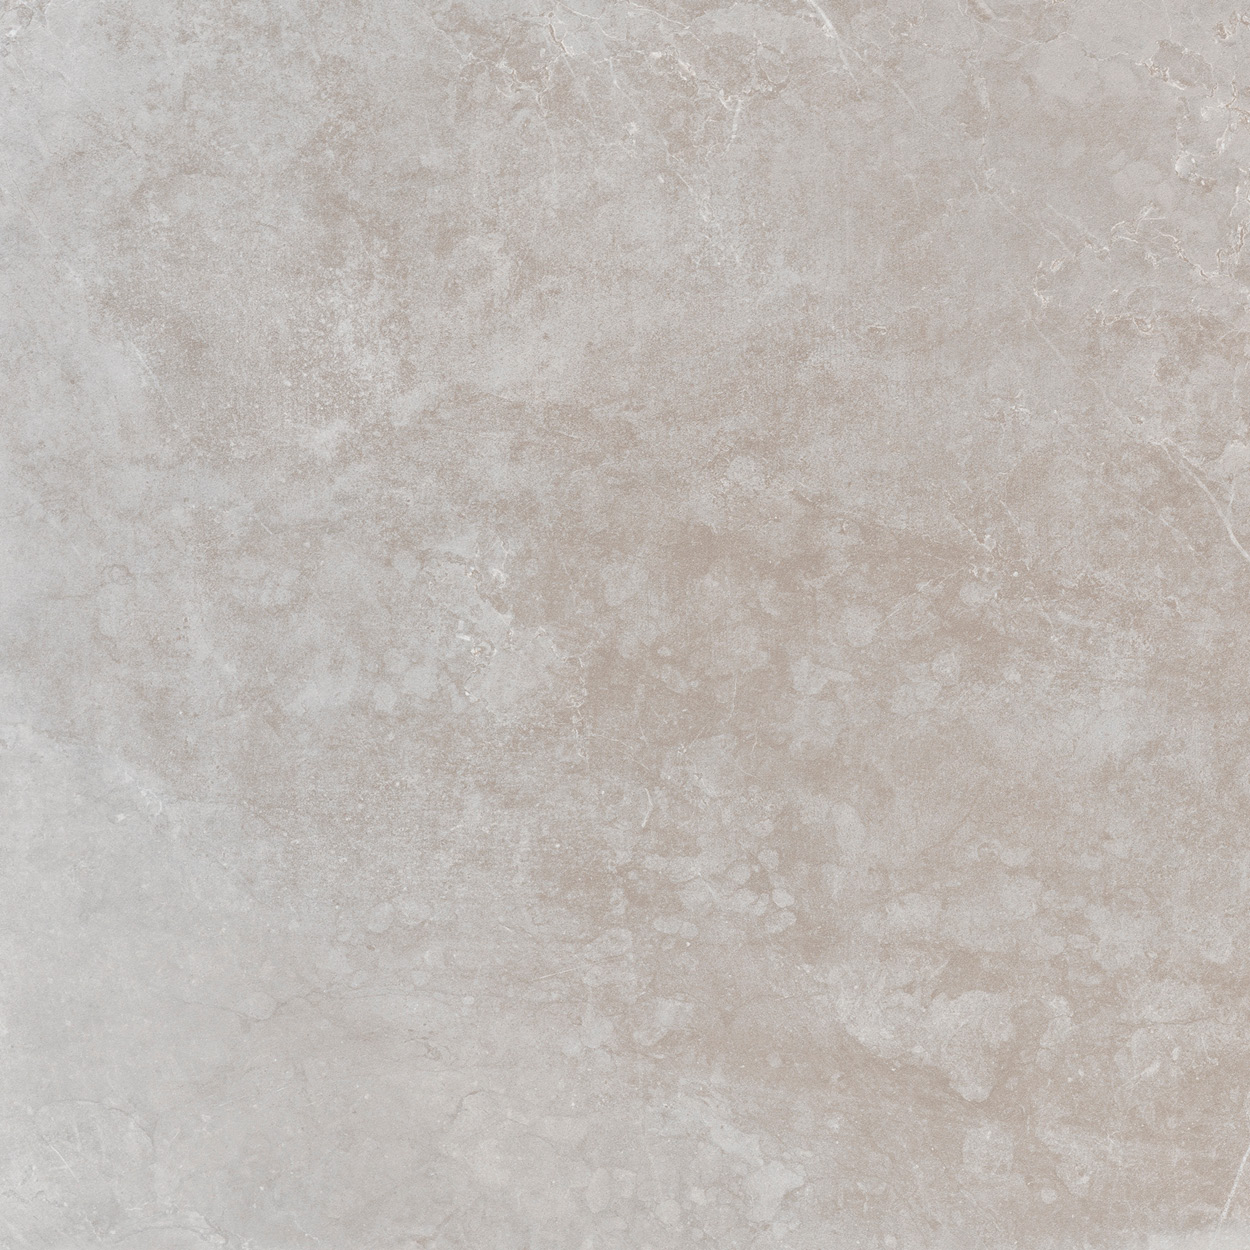 16 X 32 Evo Stone Mist Honed finished Rectified Porcelain Tile (SPECIAL ORDER ONLY)